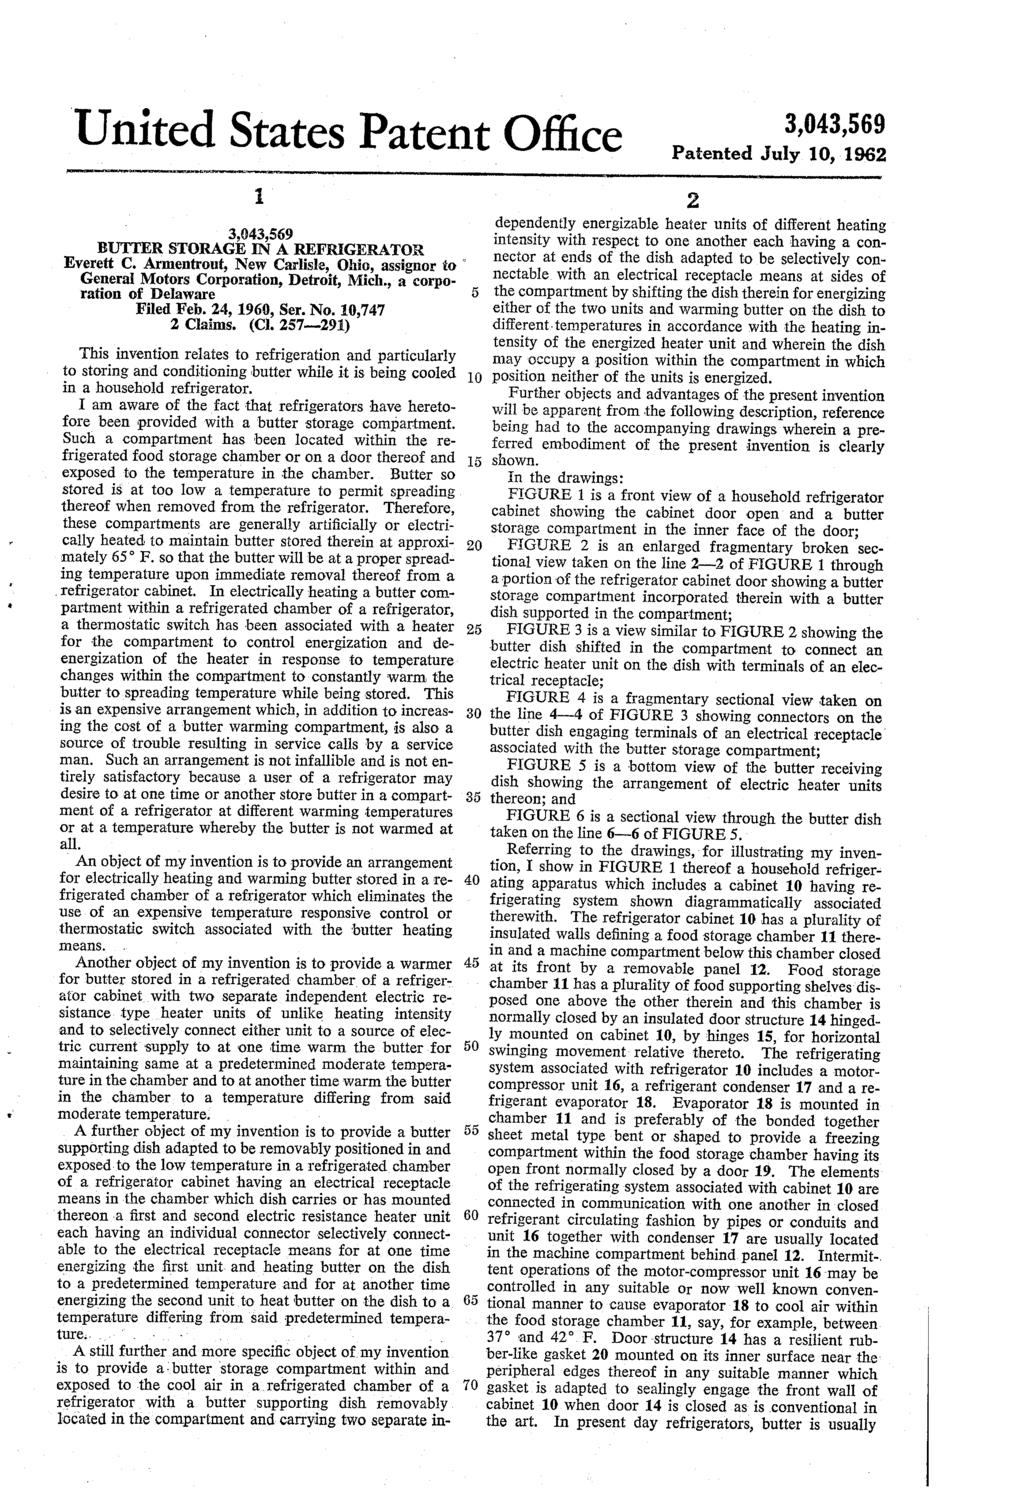 United States Patent Office copacas f 3,043,69 BUTTER STORAGE IN A REFRGERATOR Everett C. Armentrout, New Carlisle, Ohio, assignor to General Motors Corporation, Detroit, Mich.